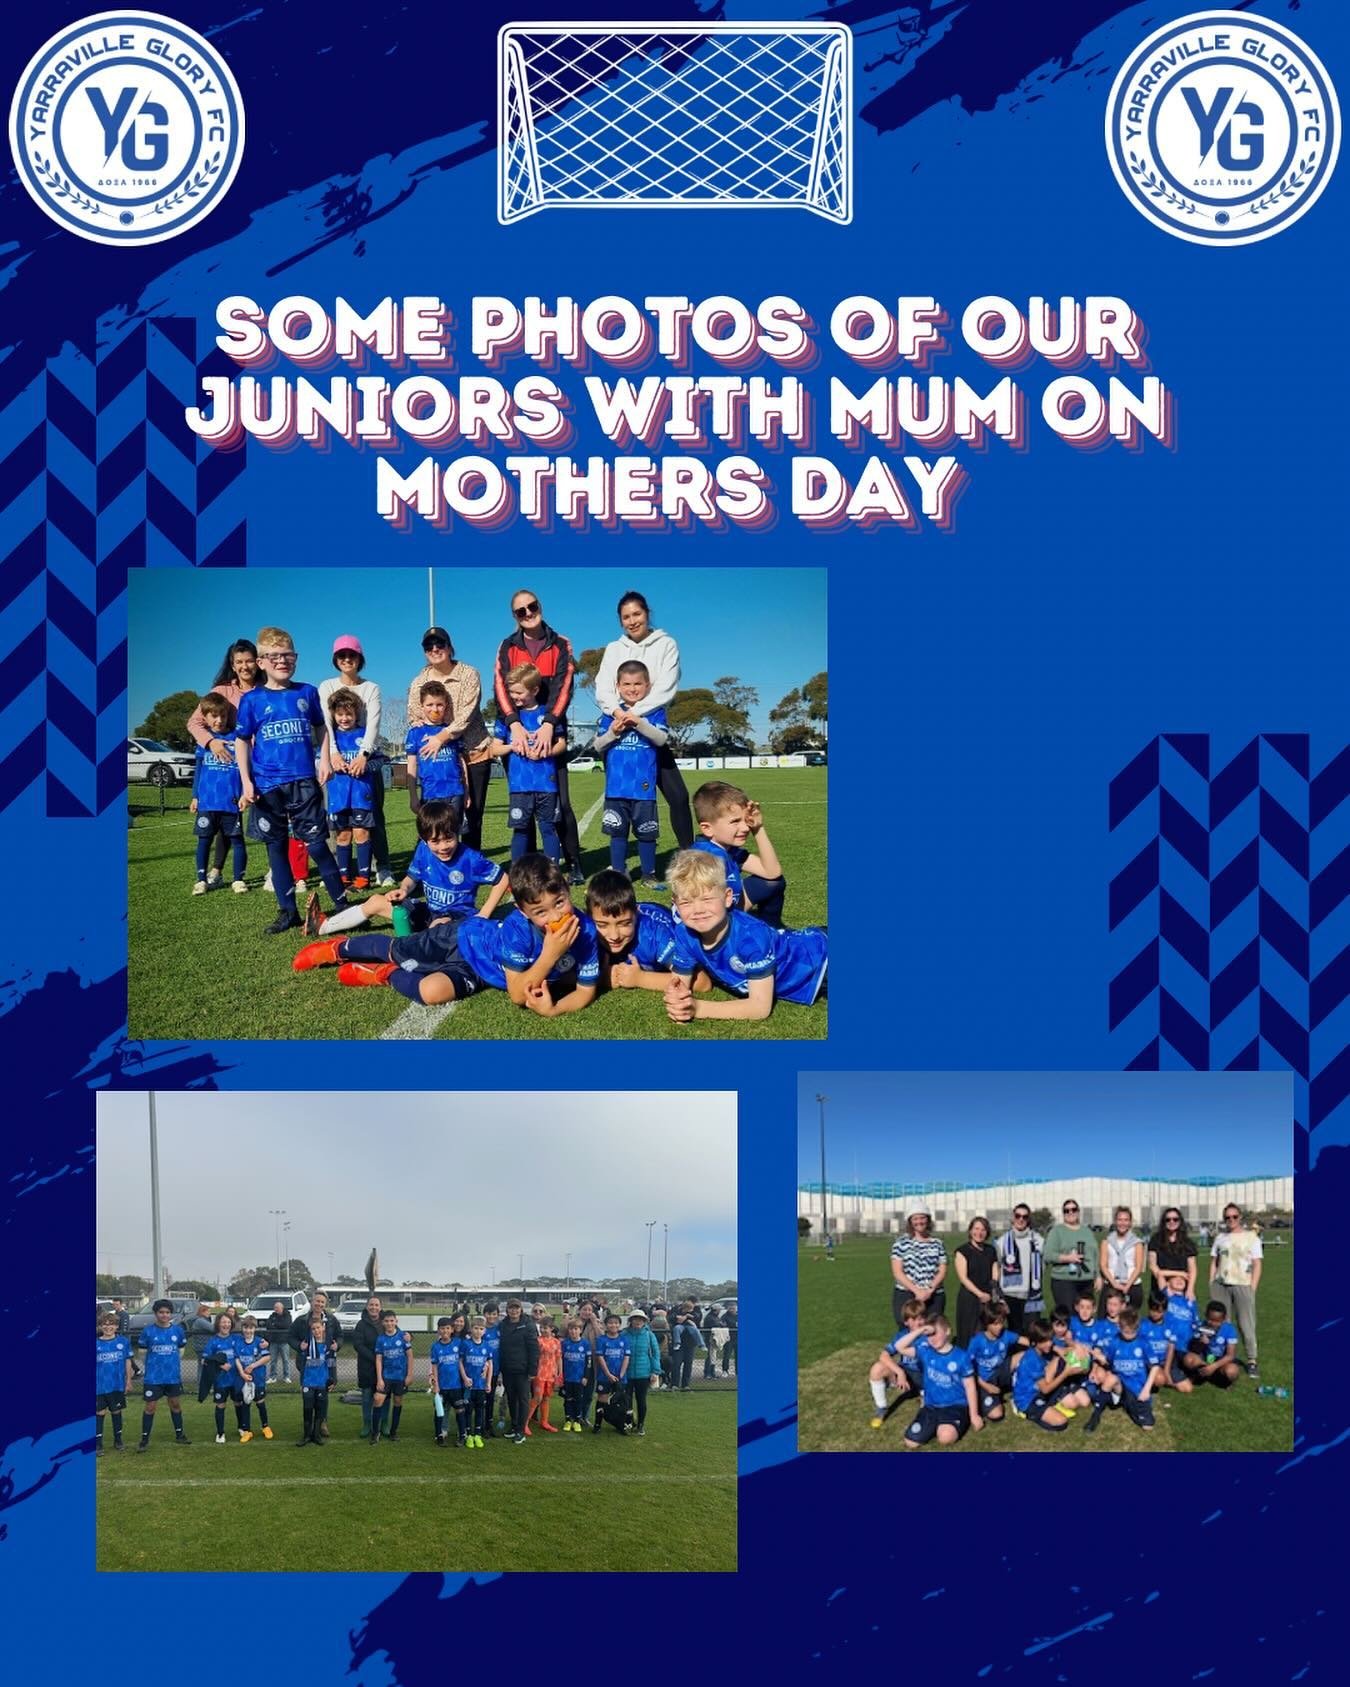 A few snaps with the Wallabies U9&rsquo;s and U11&rsquo;s and their mums enjoying the fantastic weather on Mothers Days #doxa #ygfc #glory